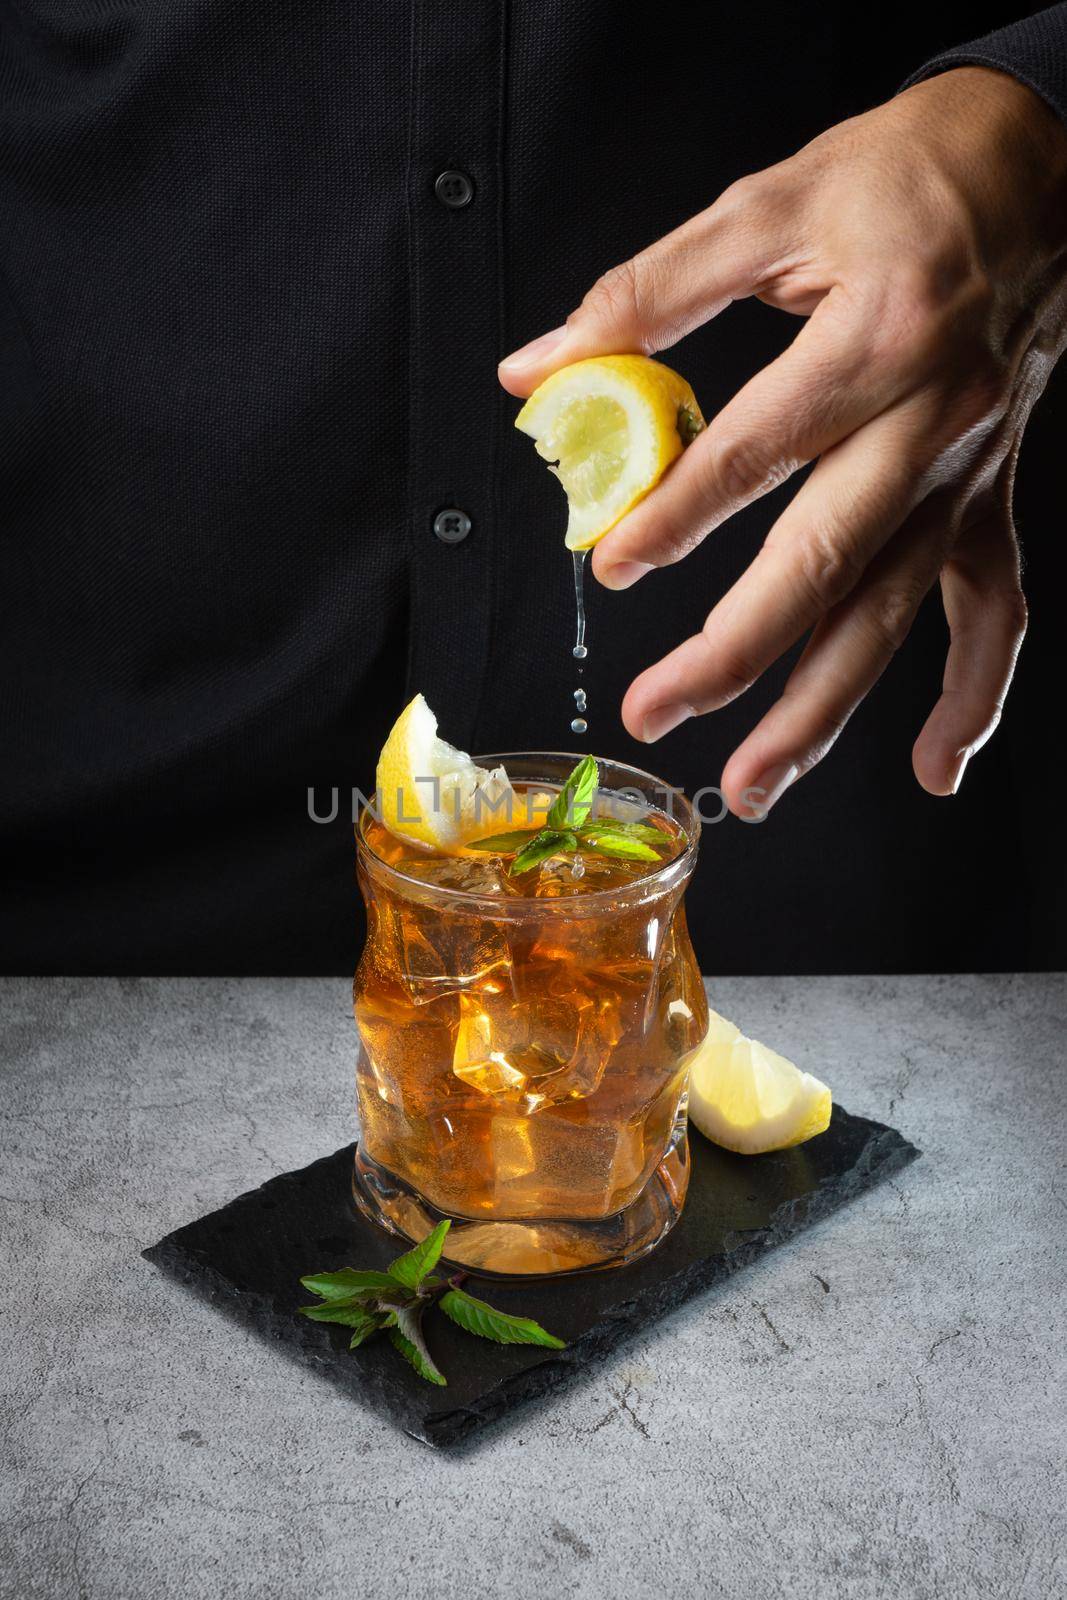 glass of tea with ice and lemon slices with fresh mint leaves and hand of the bartender in a black shirt squeezing a piece of lemon on top of the glass